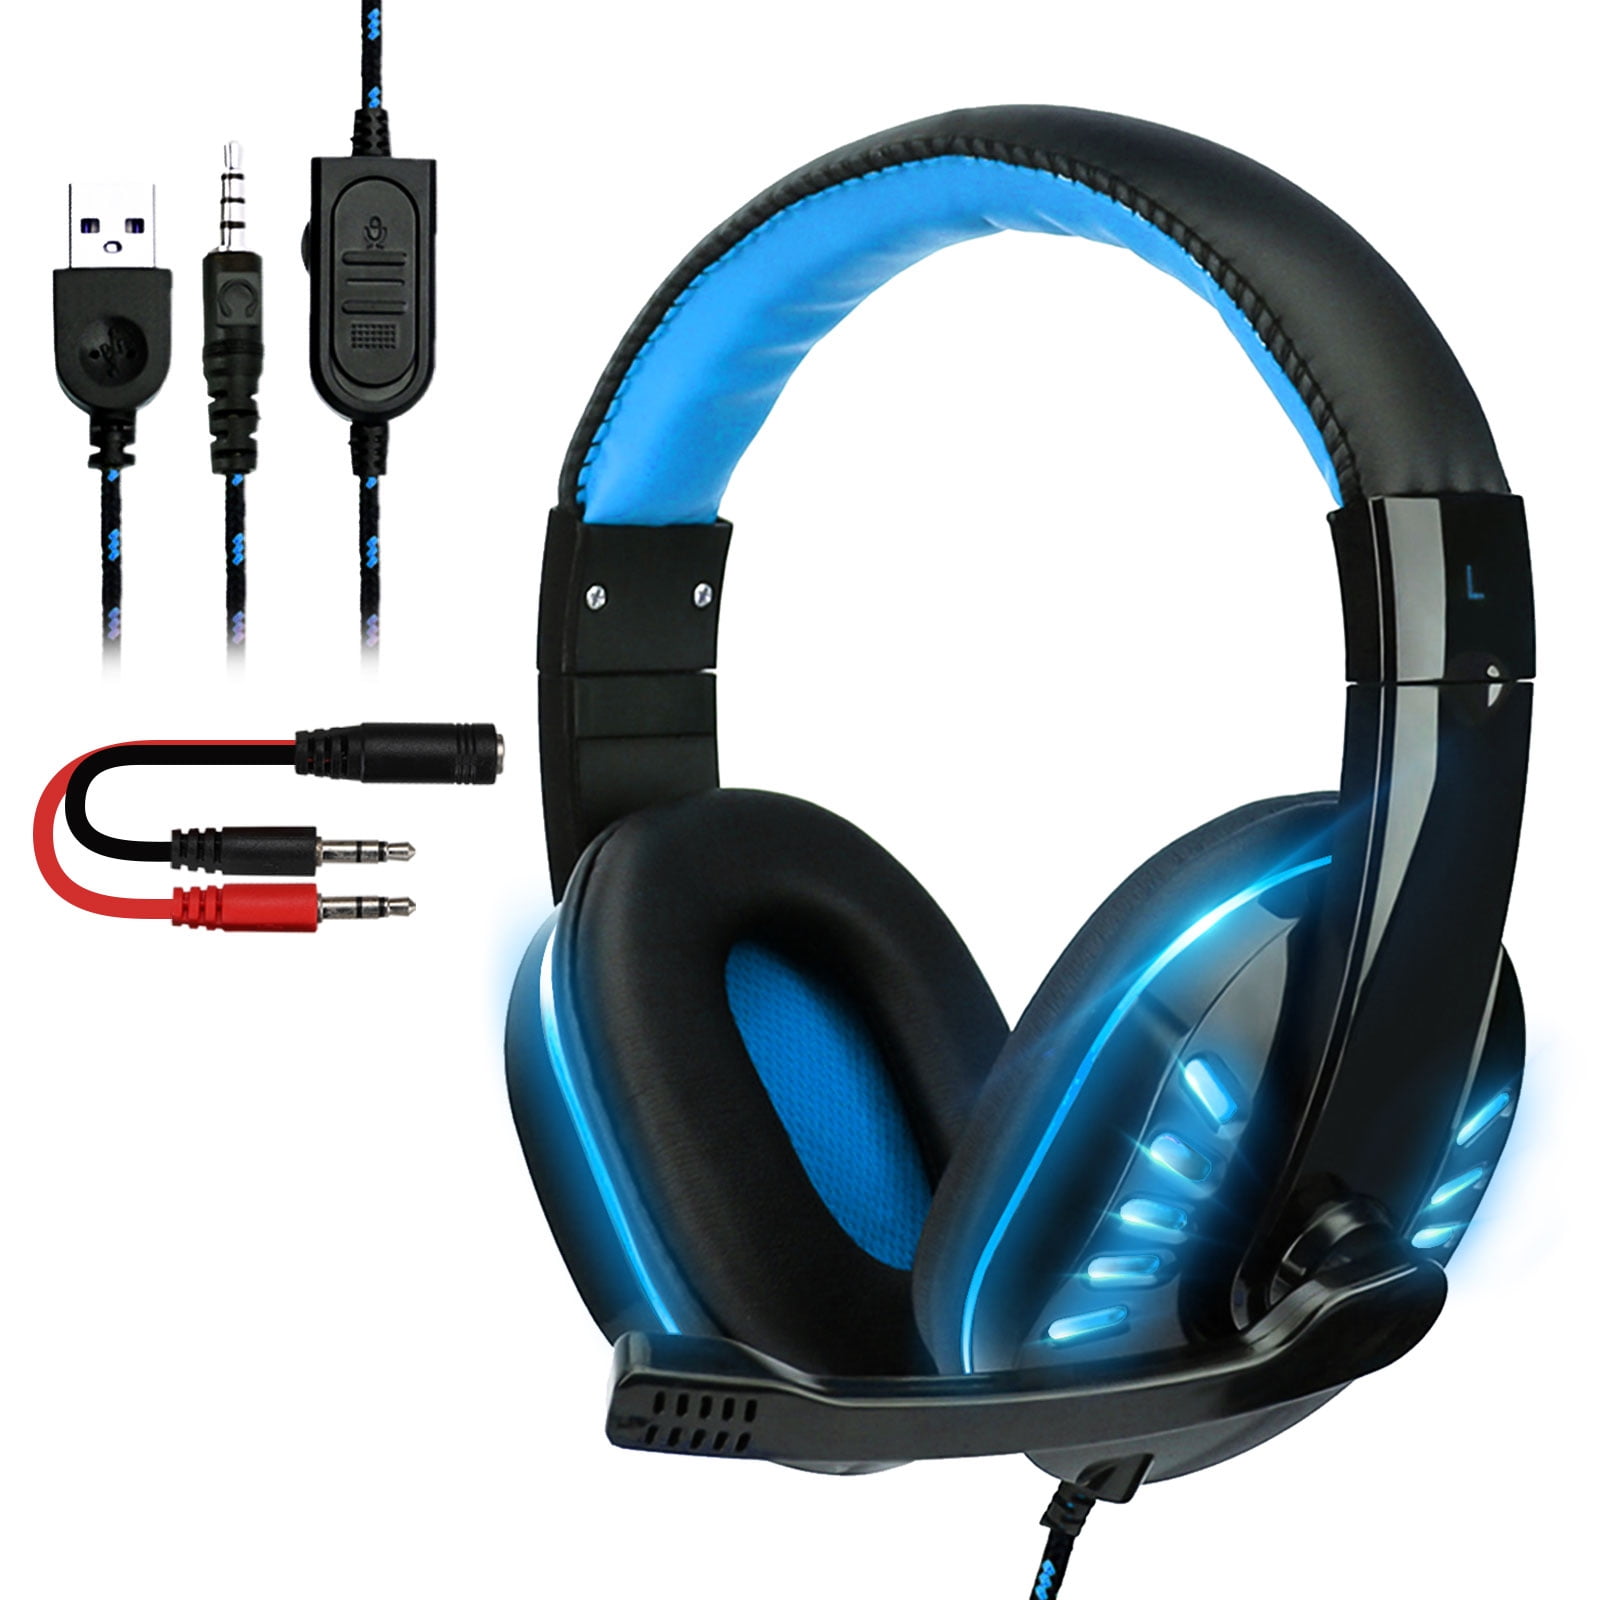 Gaming Headset for PS4, Xbox One, PC Headset with Noise Canceling Mic & LED Light, Over Ear Headphones with Stereo Surround Sound, Soft Earmuffs, Compatible with Nintendo Switch, Ps4 Pro, Mac, Laptop